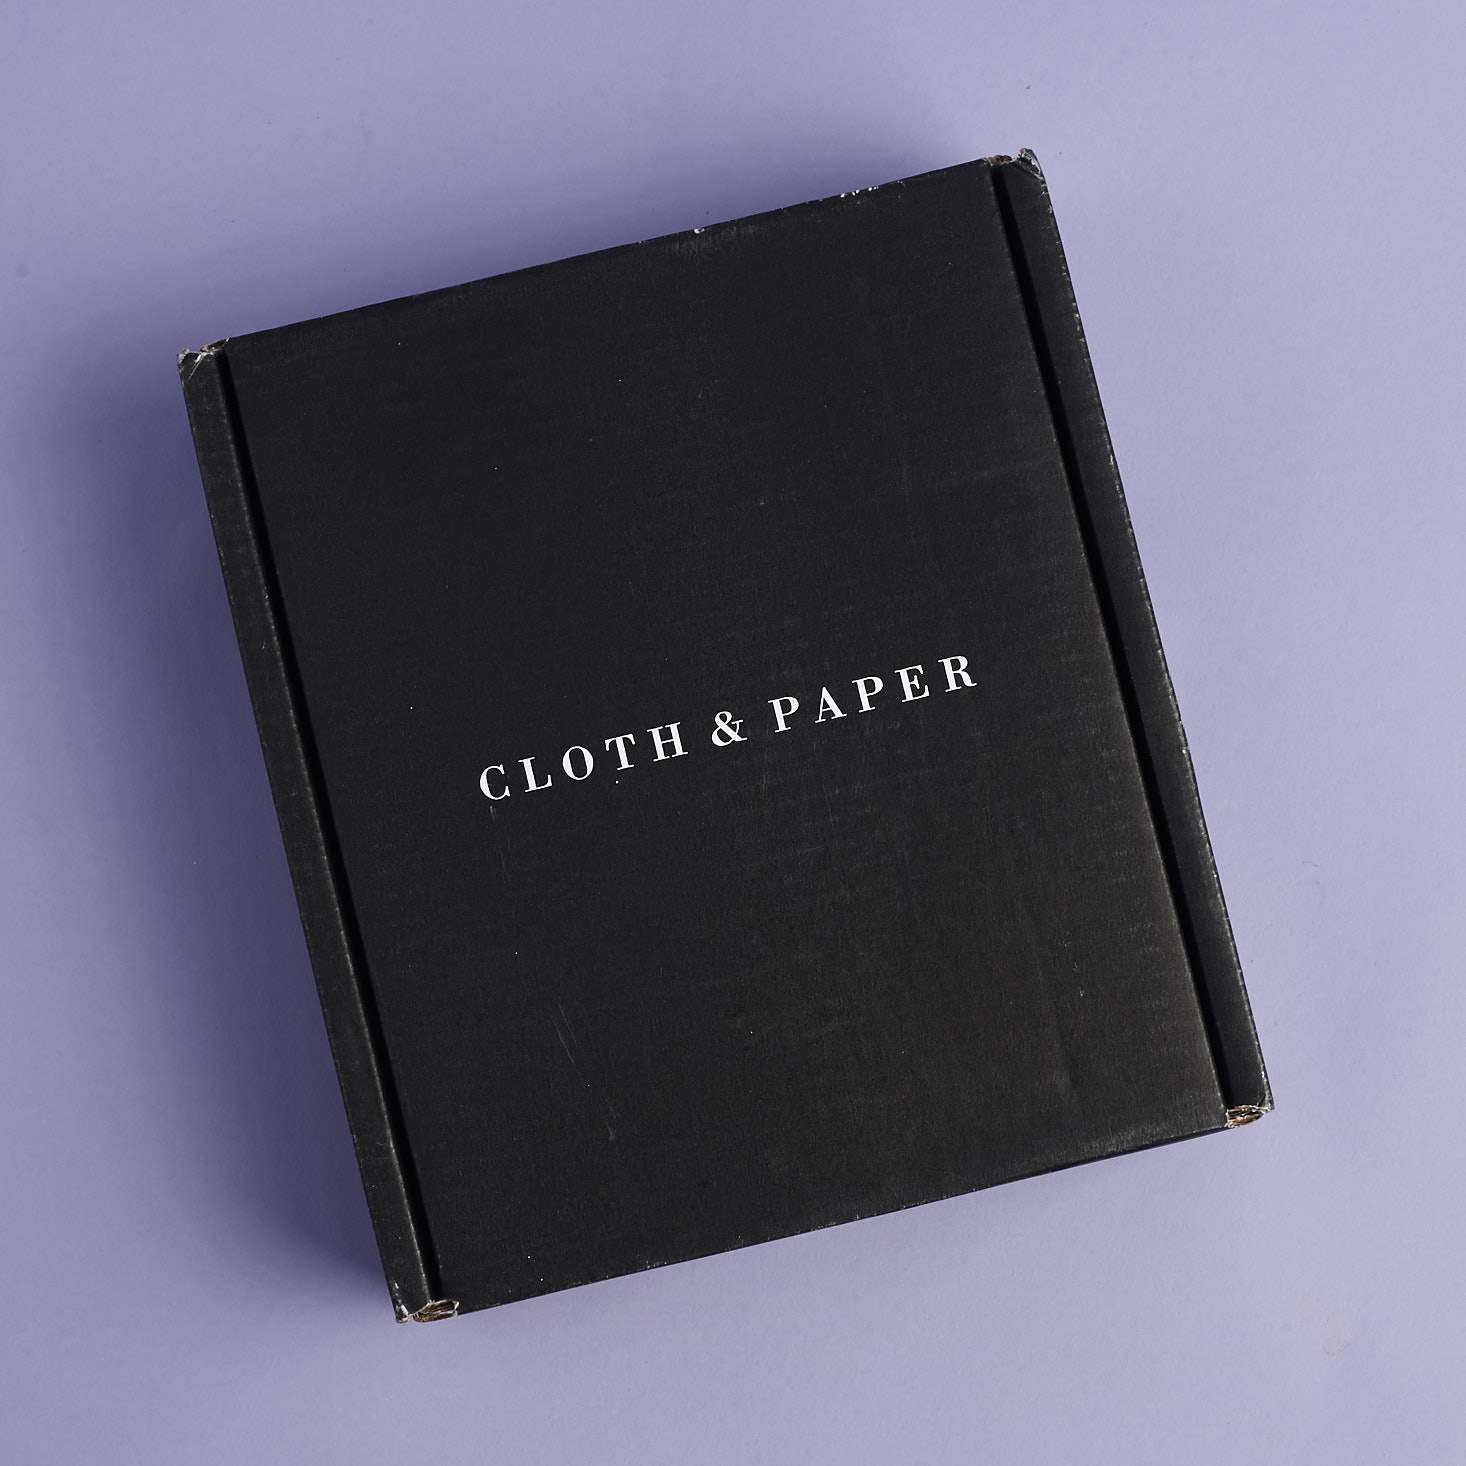 Cloth & Paper Stationery Subscription Review – February 2018